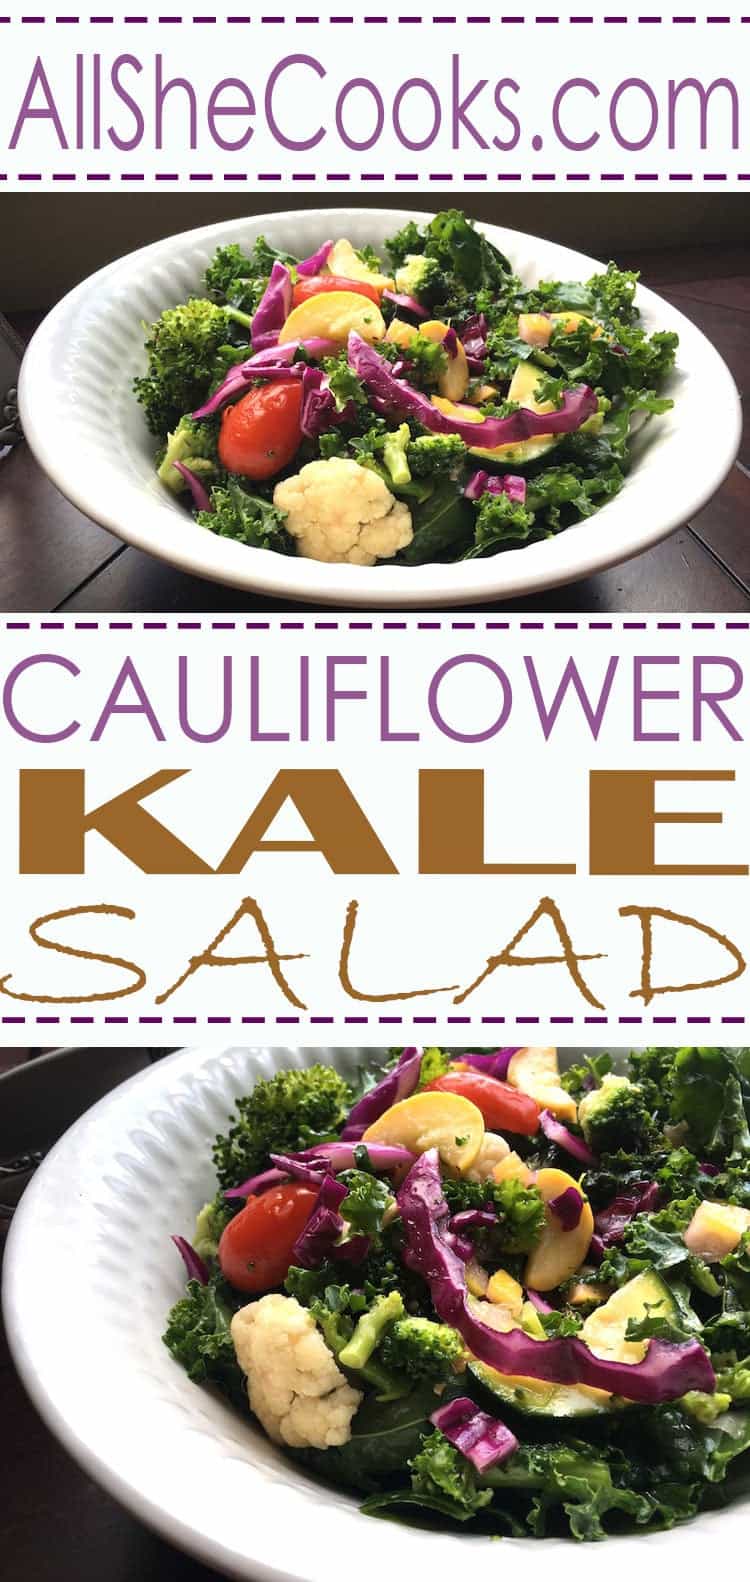 Enjoy this tasty Cauliflower Kale Salad that is made with the freshest healthy ingredients and superfood ingredient kale. This is a power salad perfect for lunch or dinner.